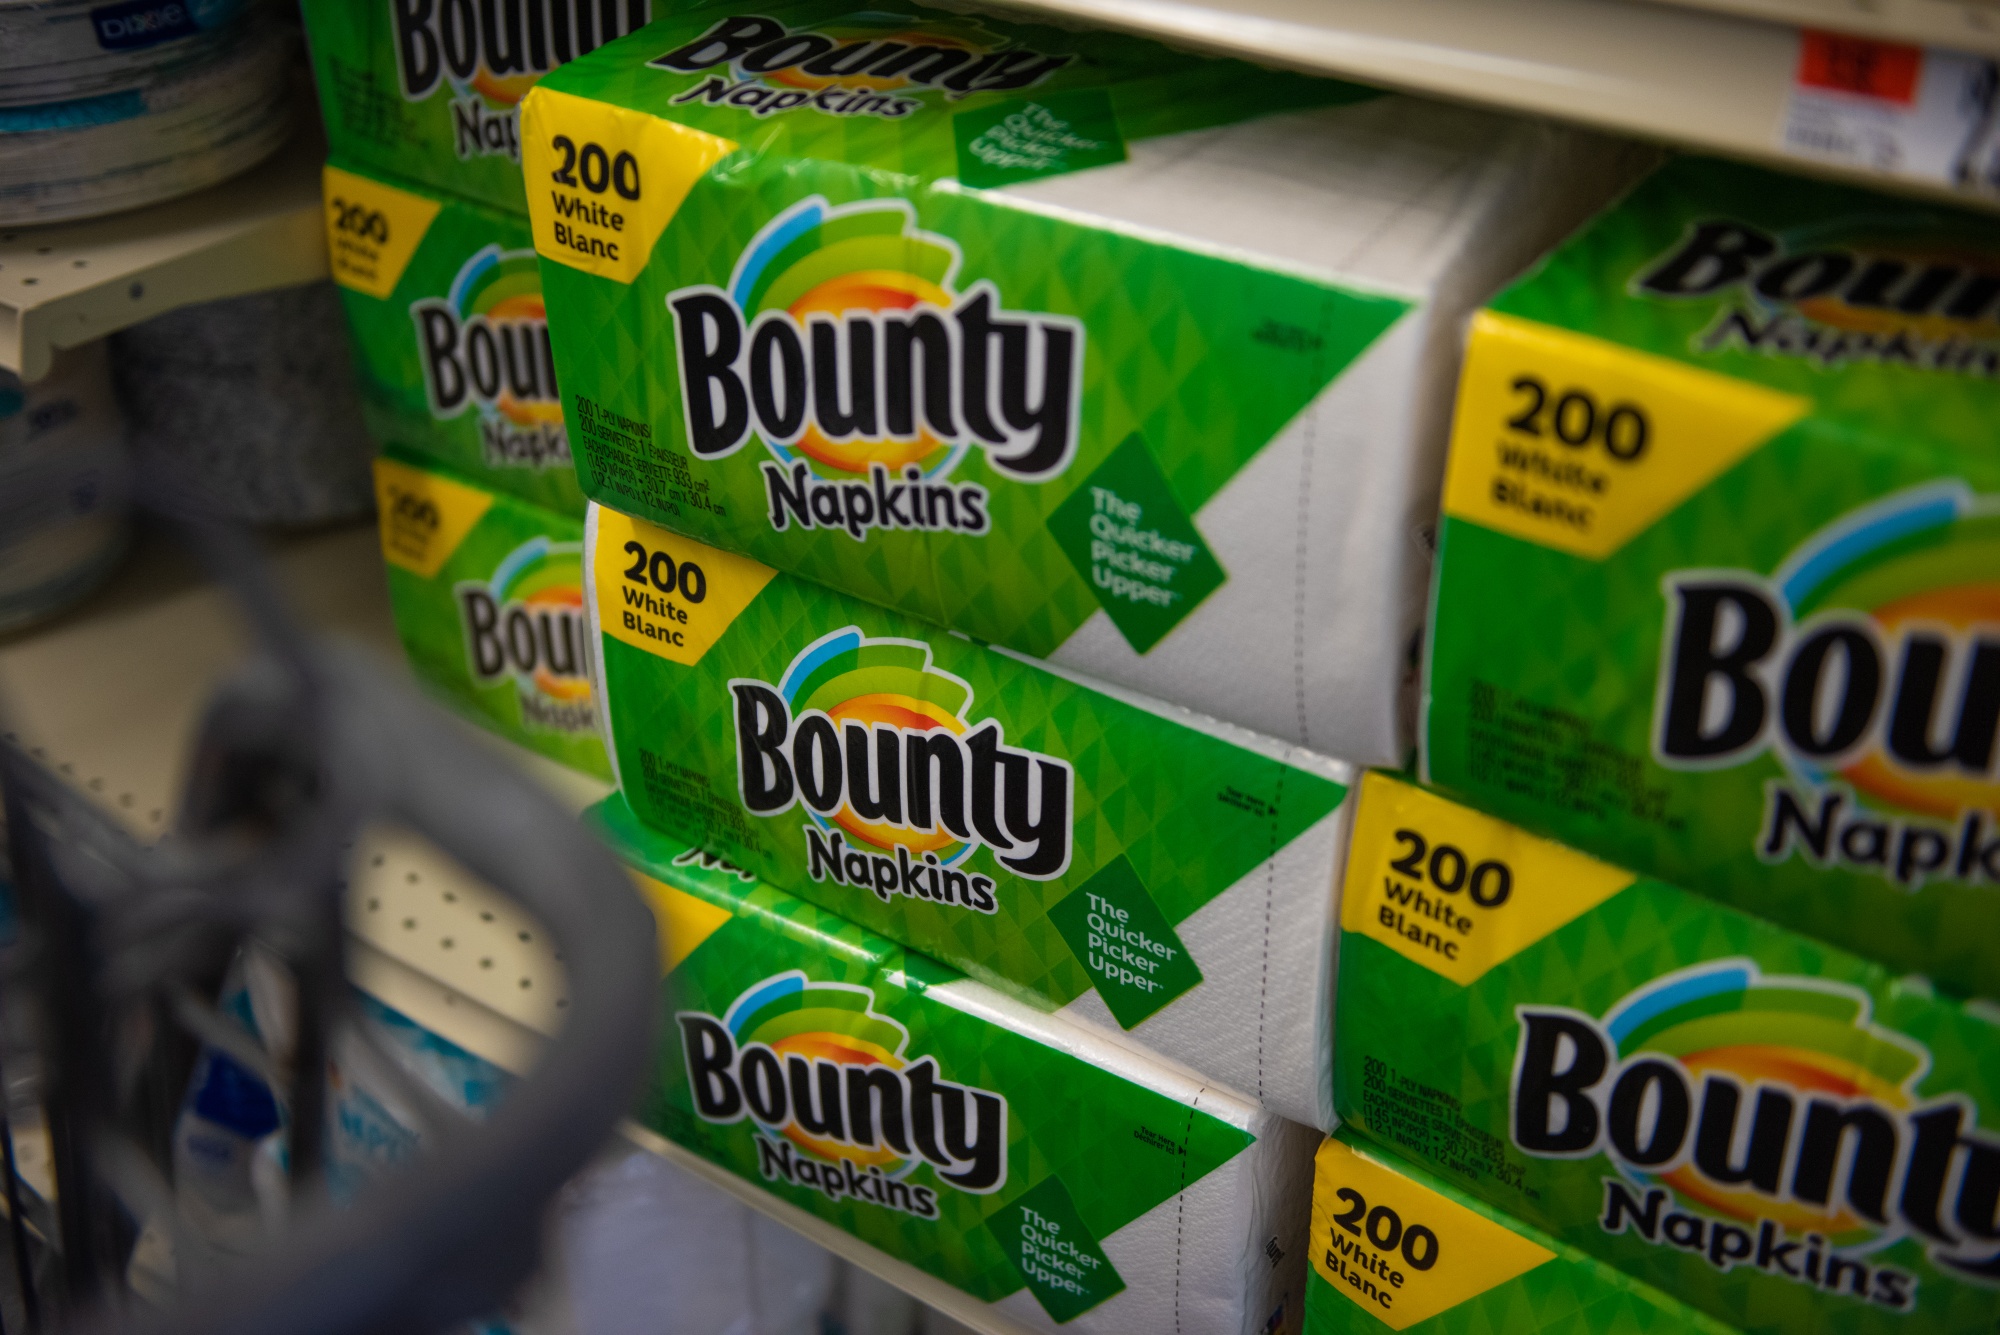 Bounty shrunk the size of their paper towels. Now, they keep